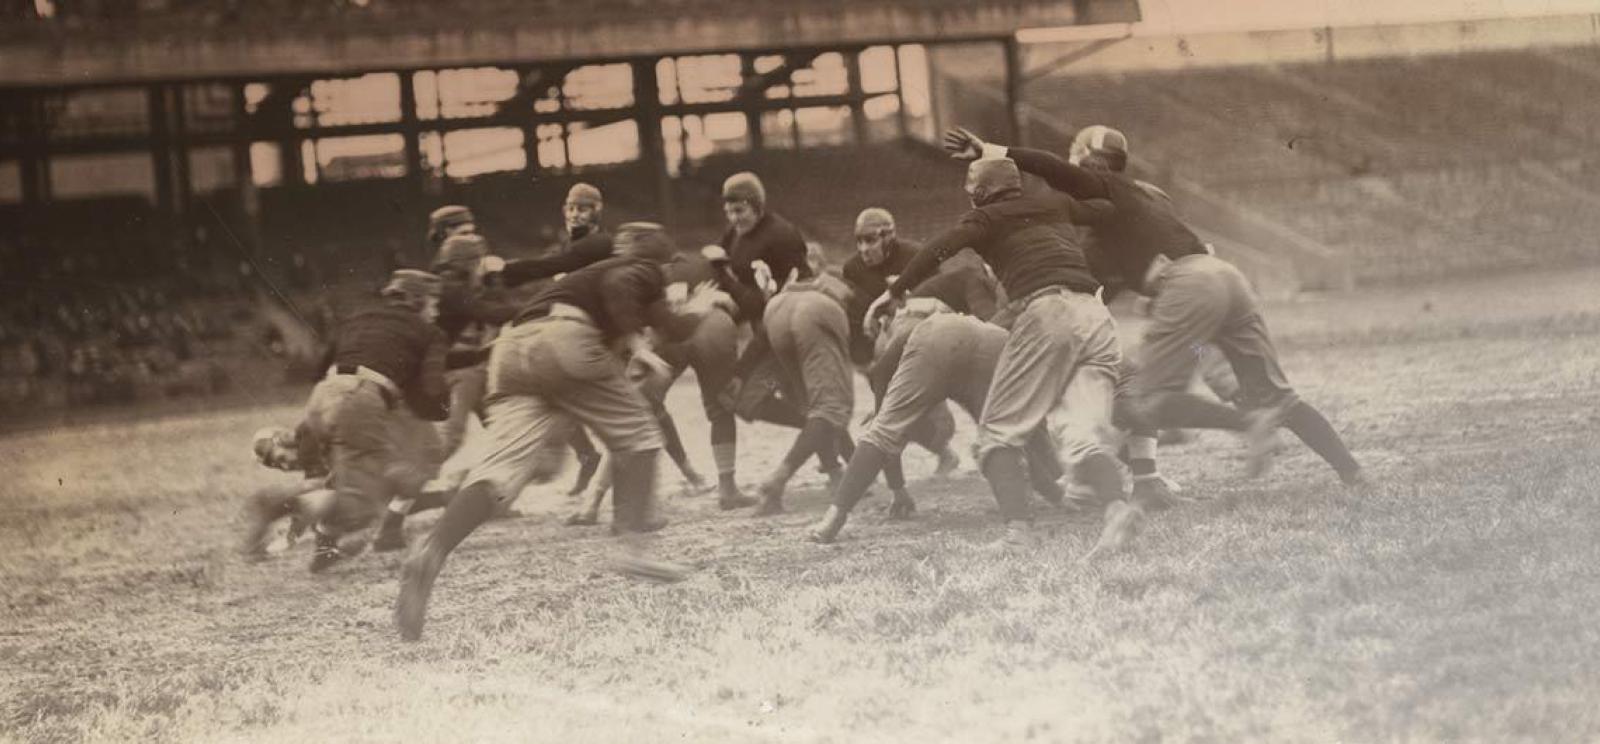 Black and white action shot of a group of North American football players mid-play.